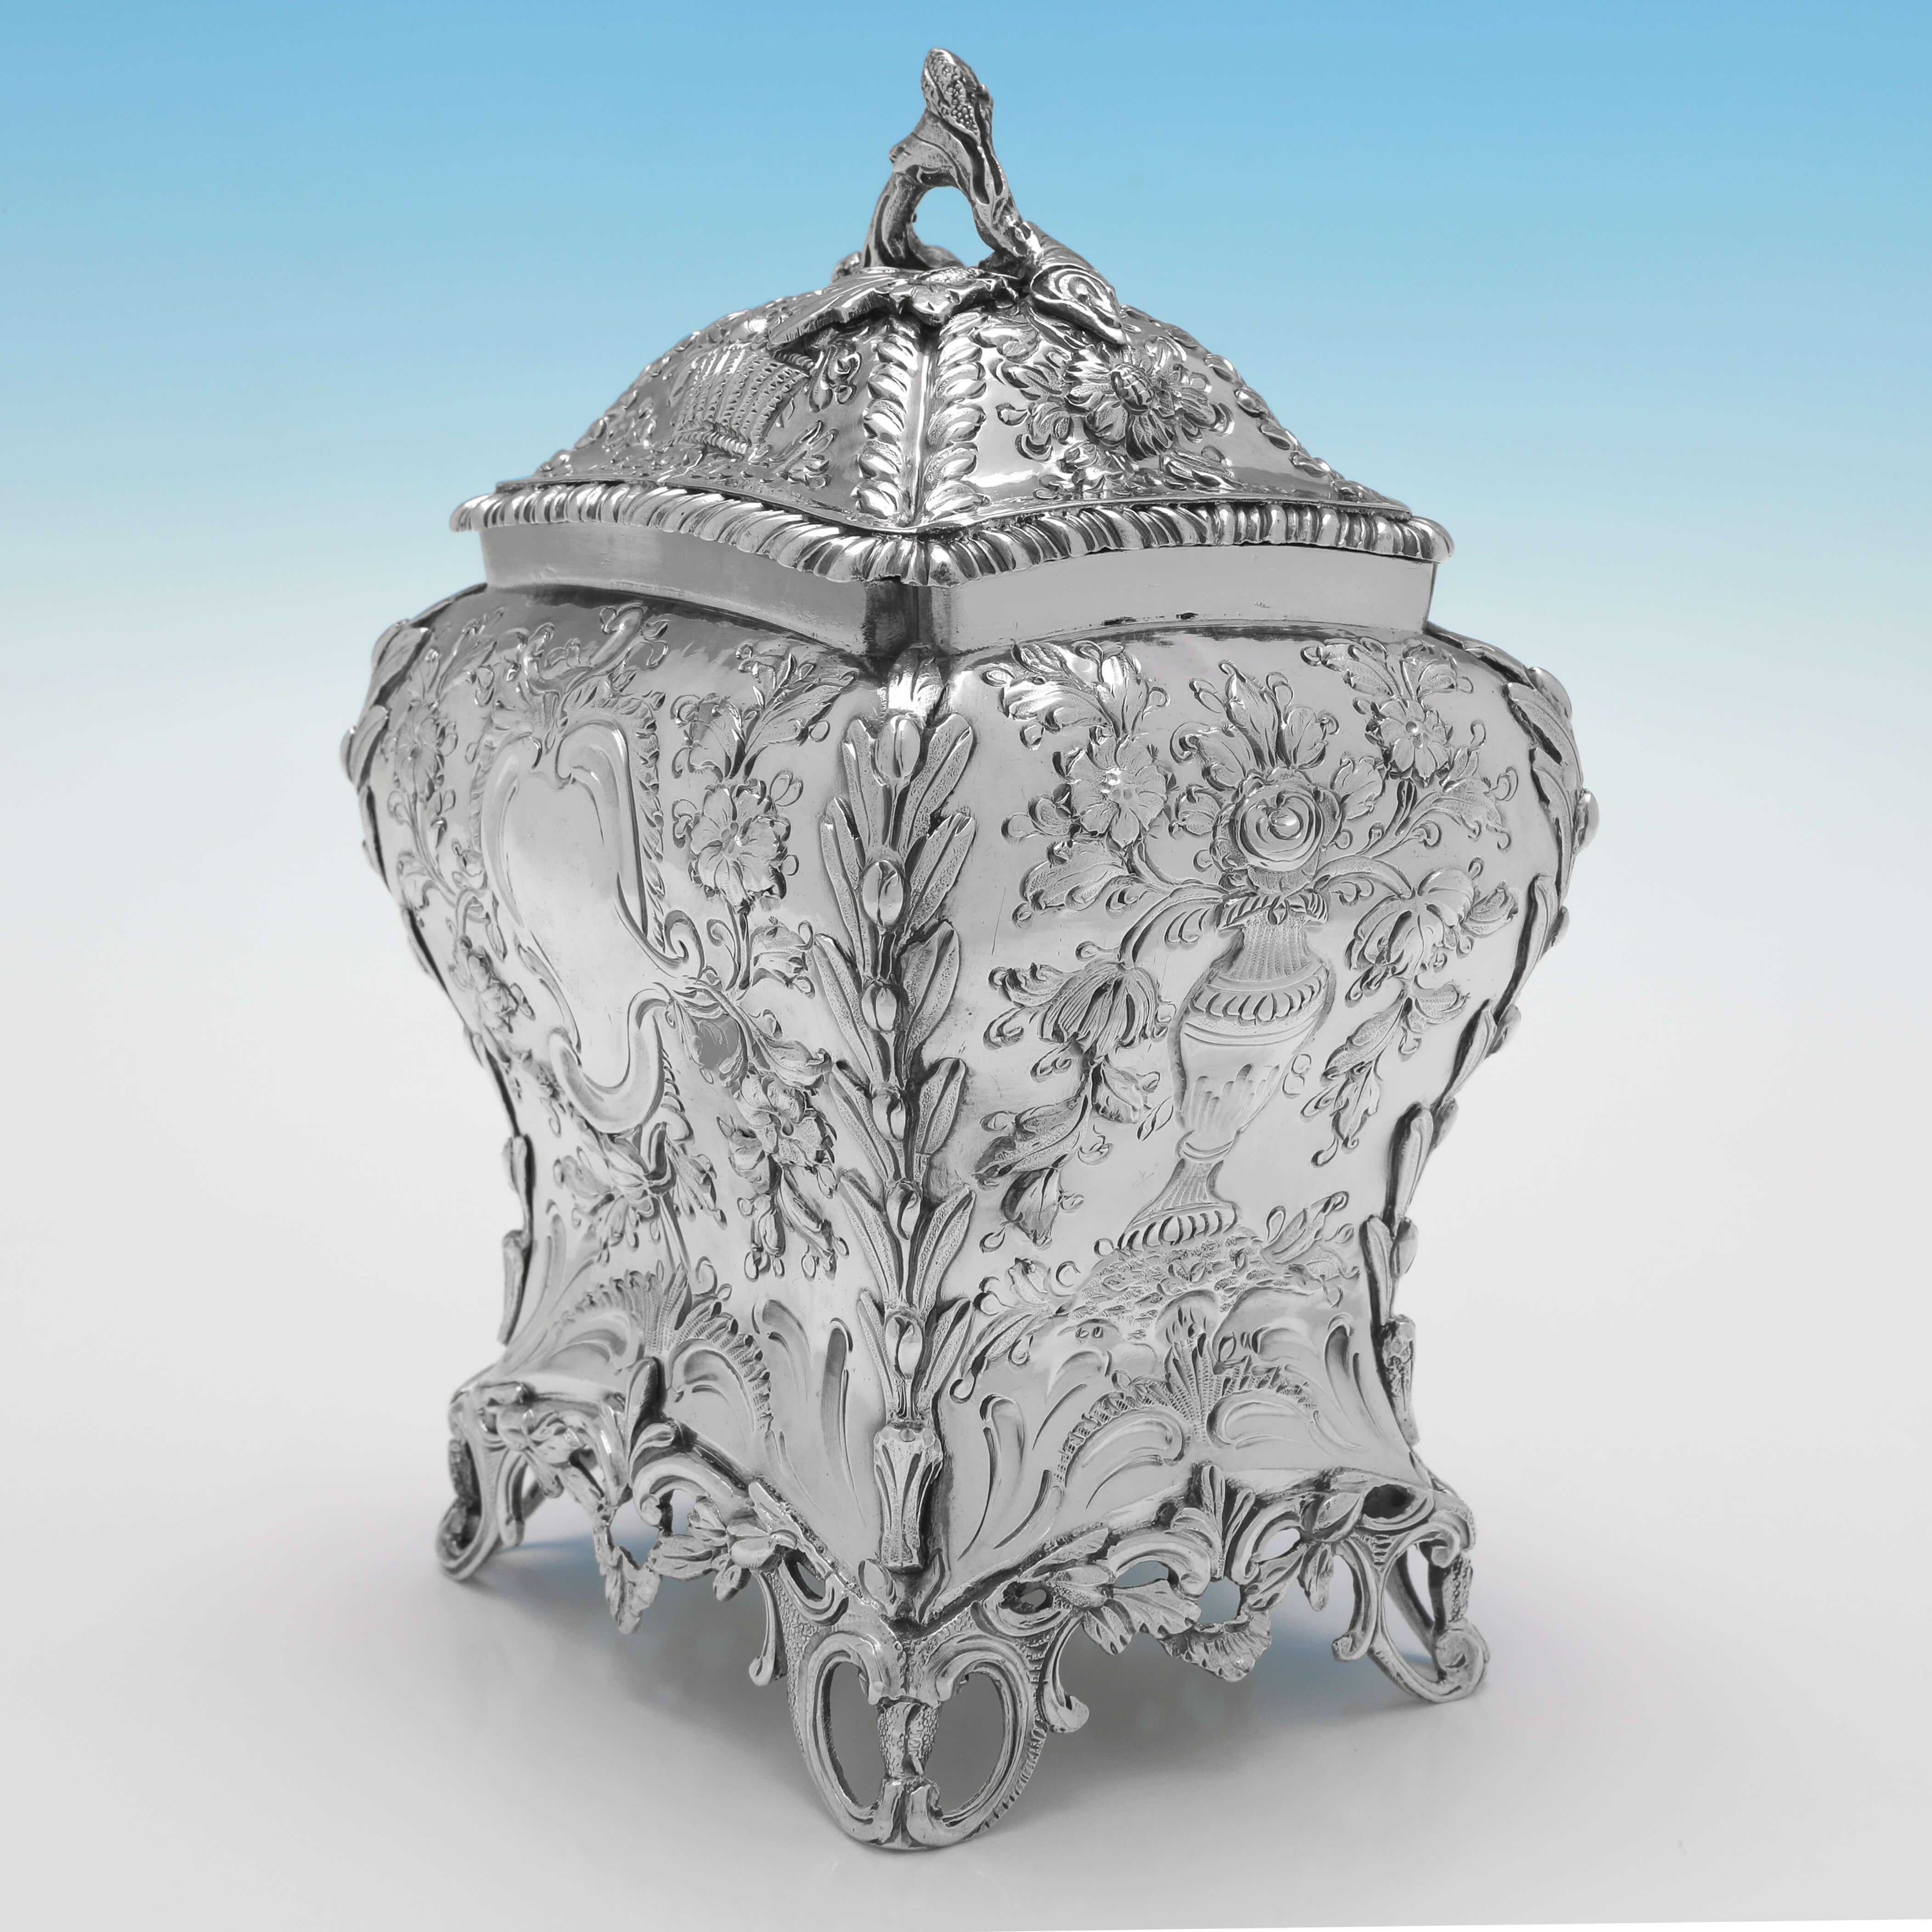 English Stunning Rococo Pair of Antique Sterling Silver Tea Caddies, London, 1768 For Sale